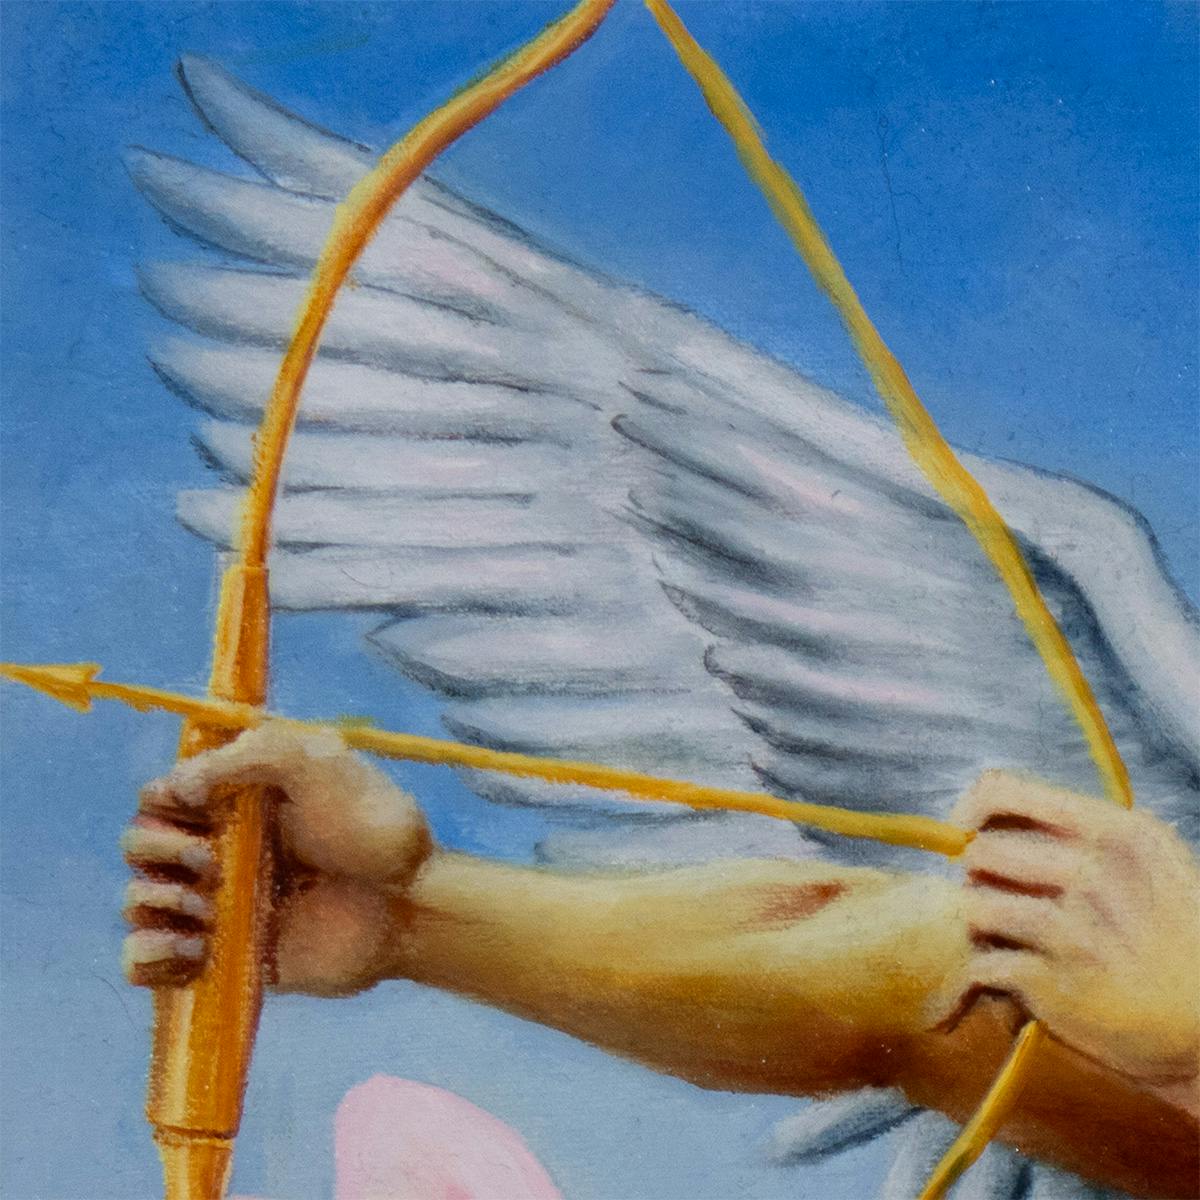 detail of an oil painting showing hands aiming a golden bow and arrow